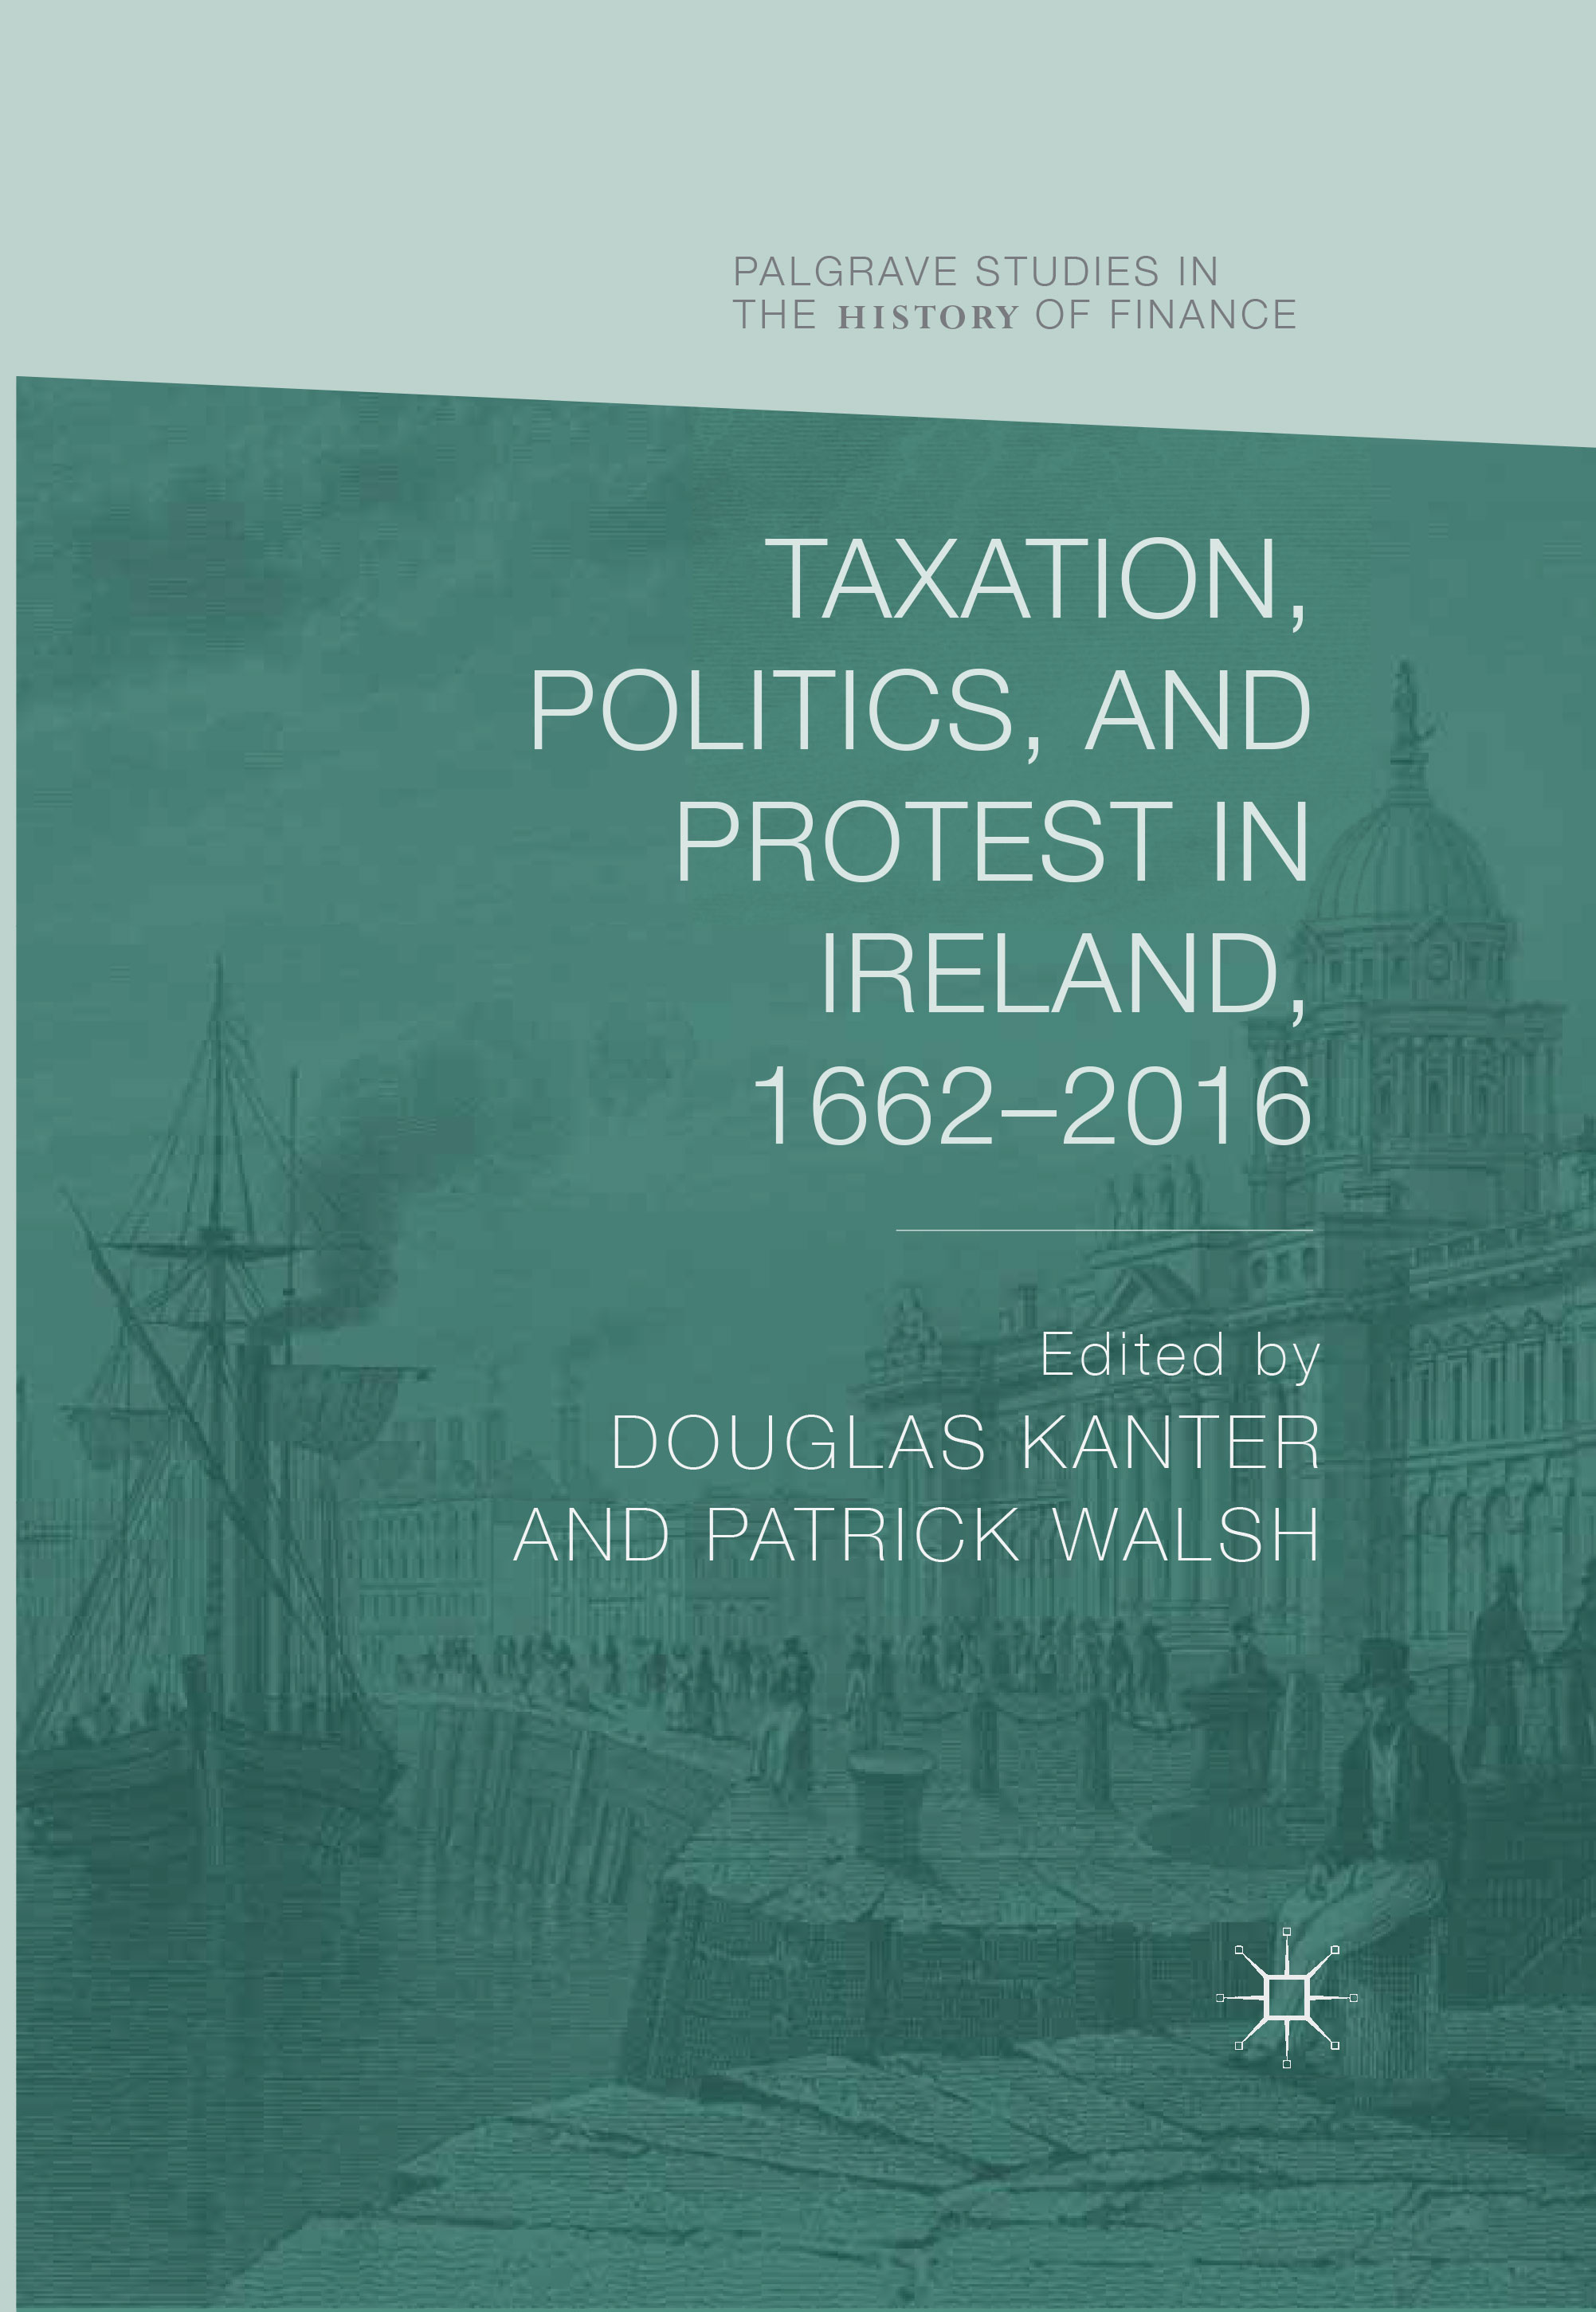 Taxation, Politics and Protest in Ireland, 1662-2016